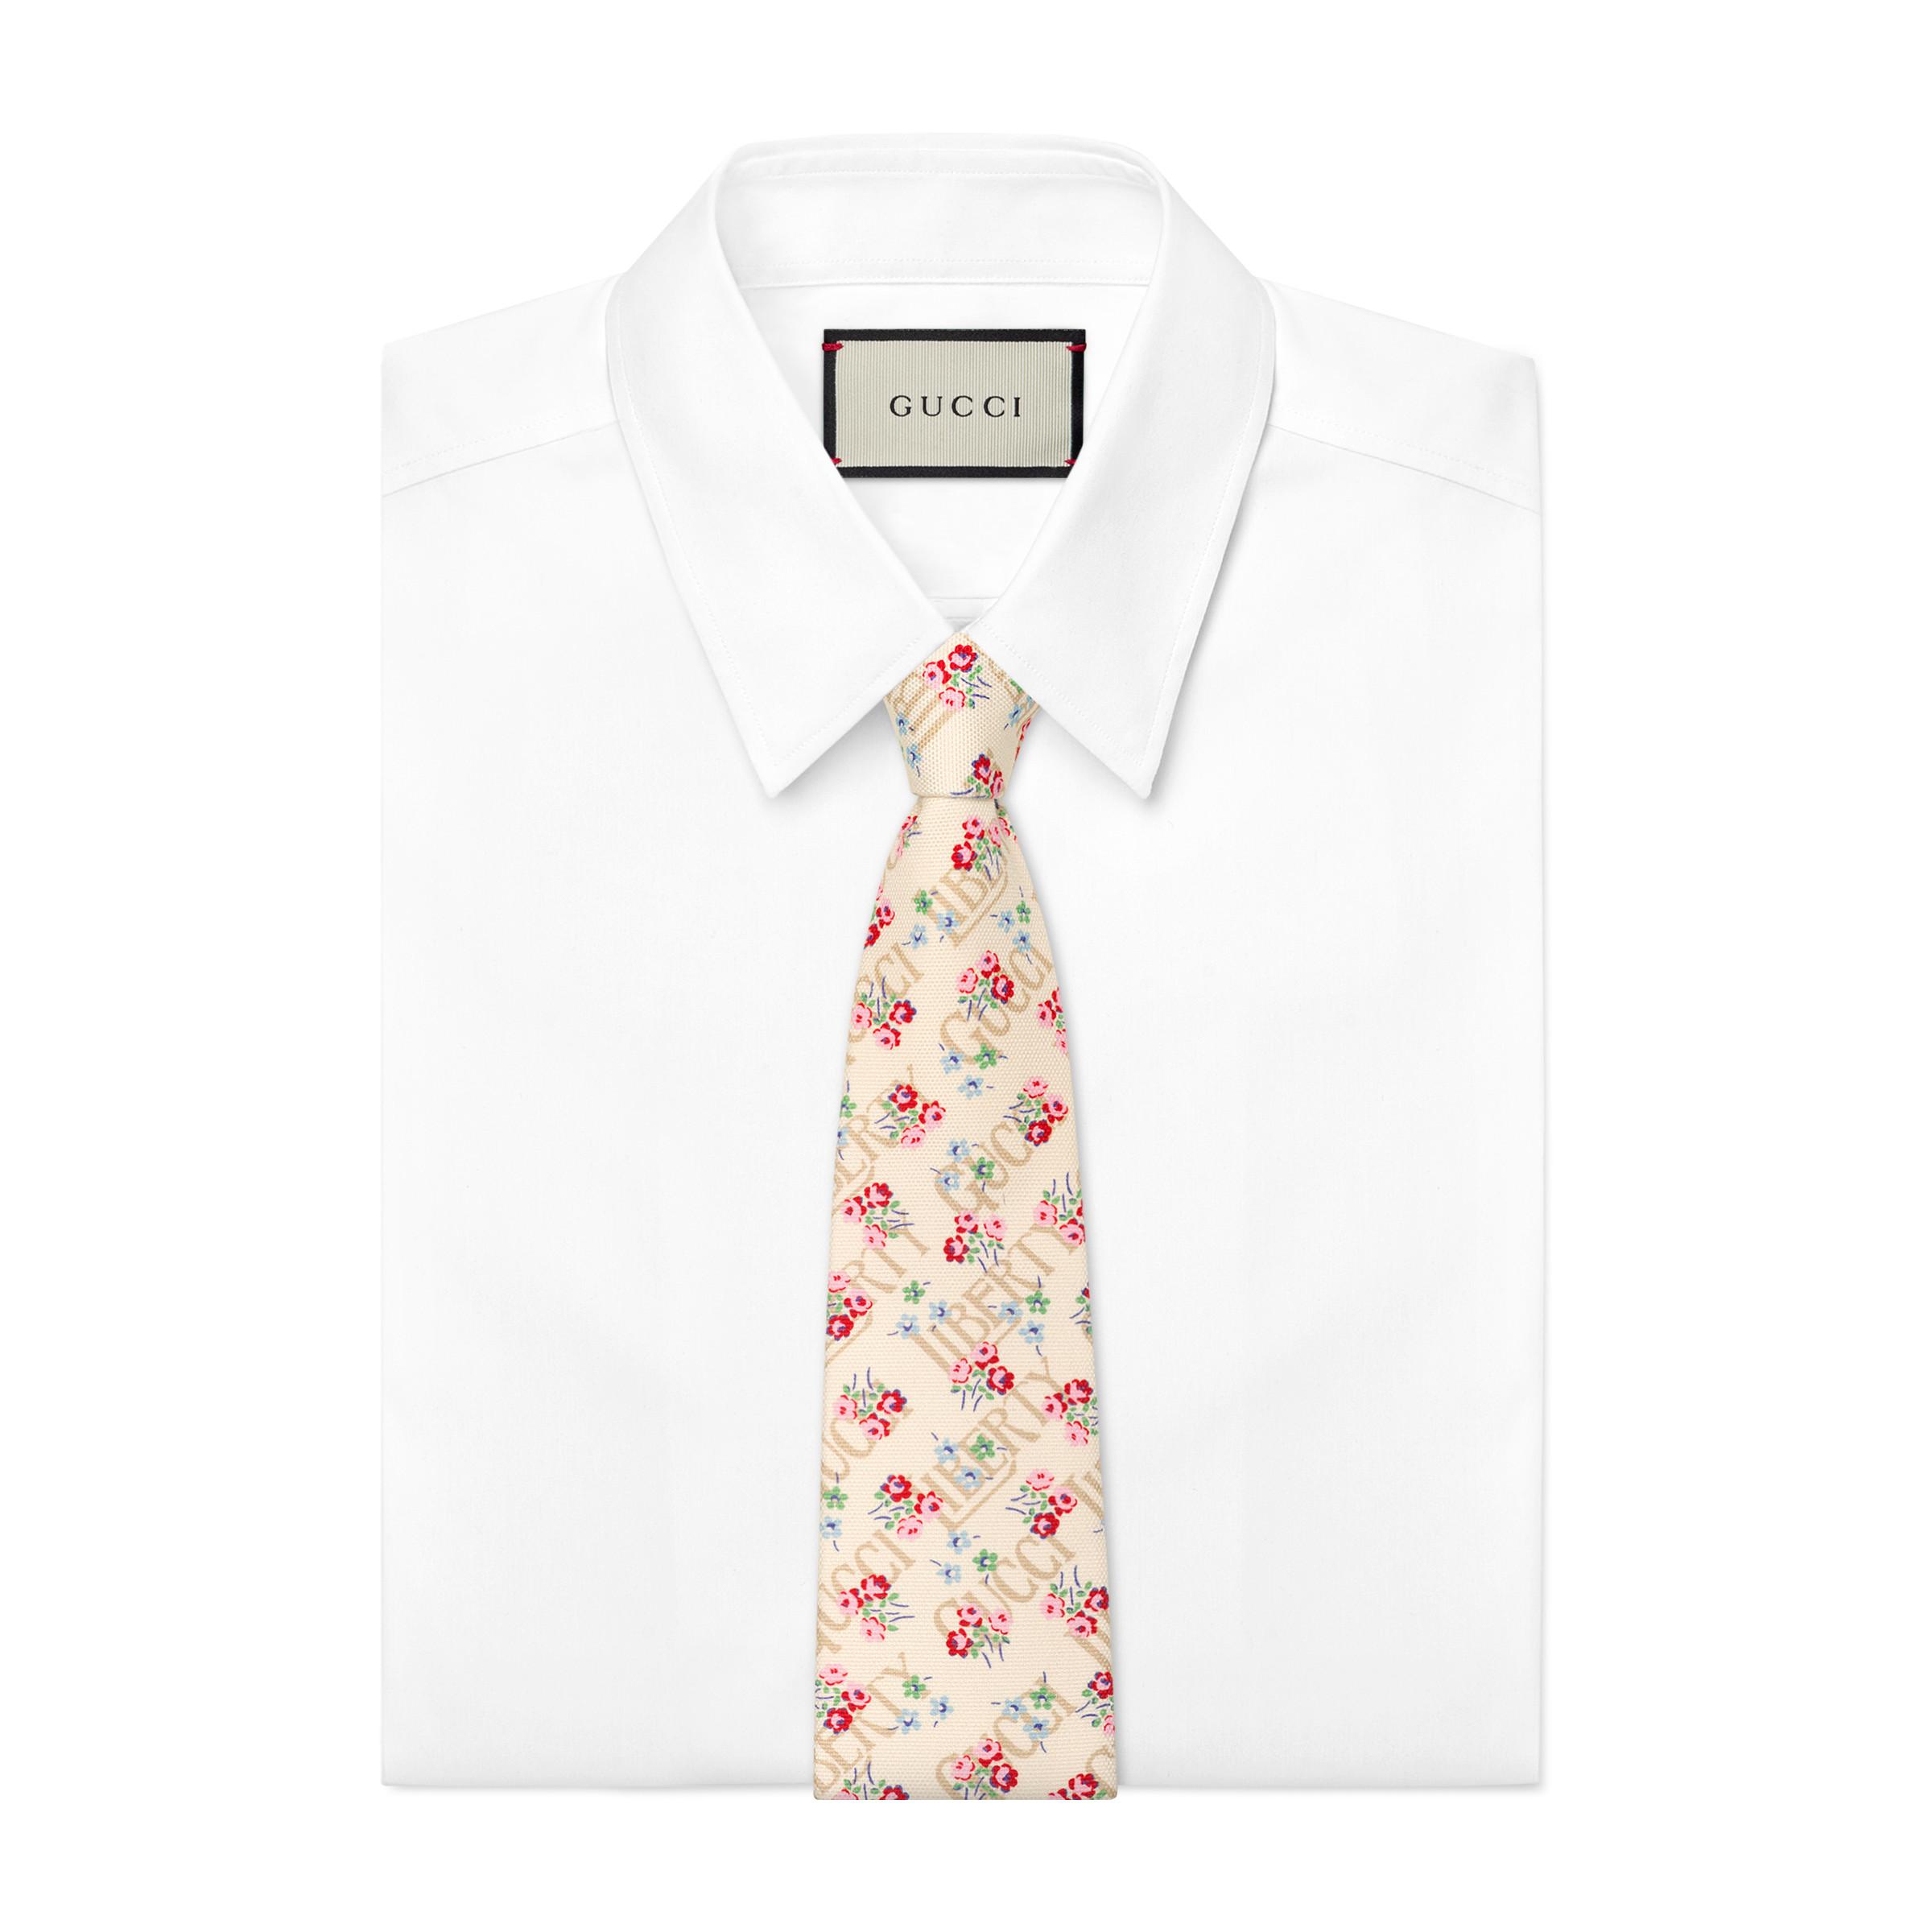 nationalsang bedstemor minimal Gucci Liberty Floral Cotton Tie in White for Men - Lyst